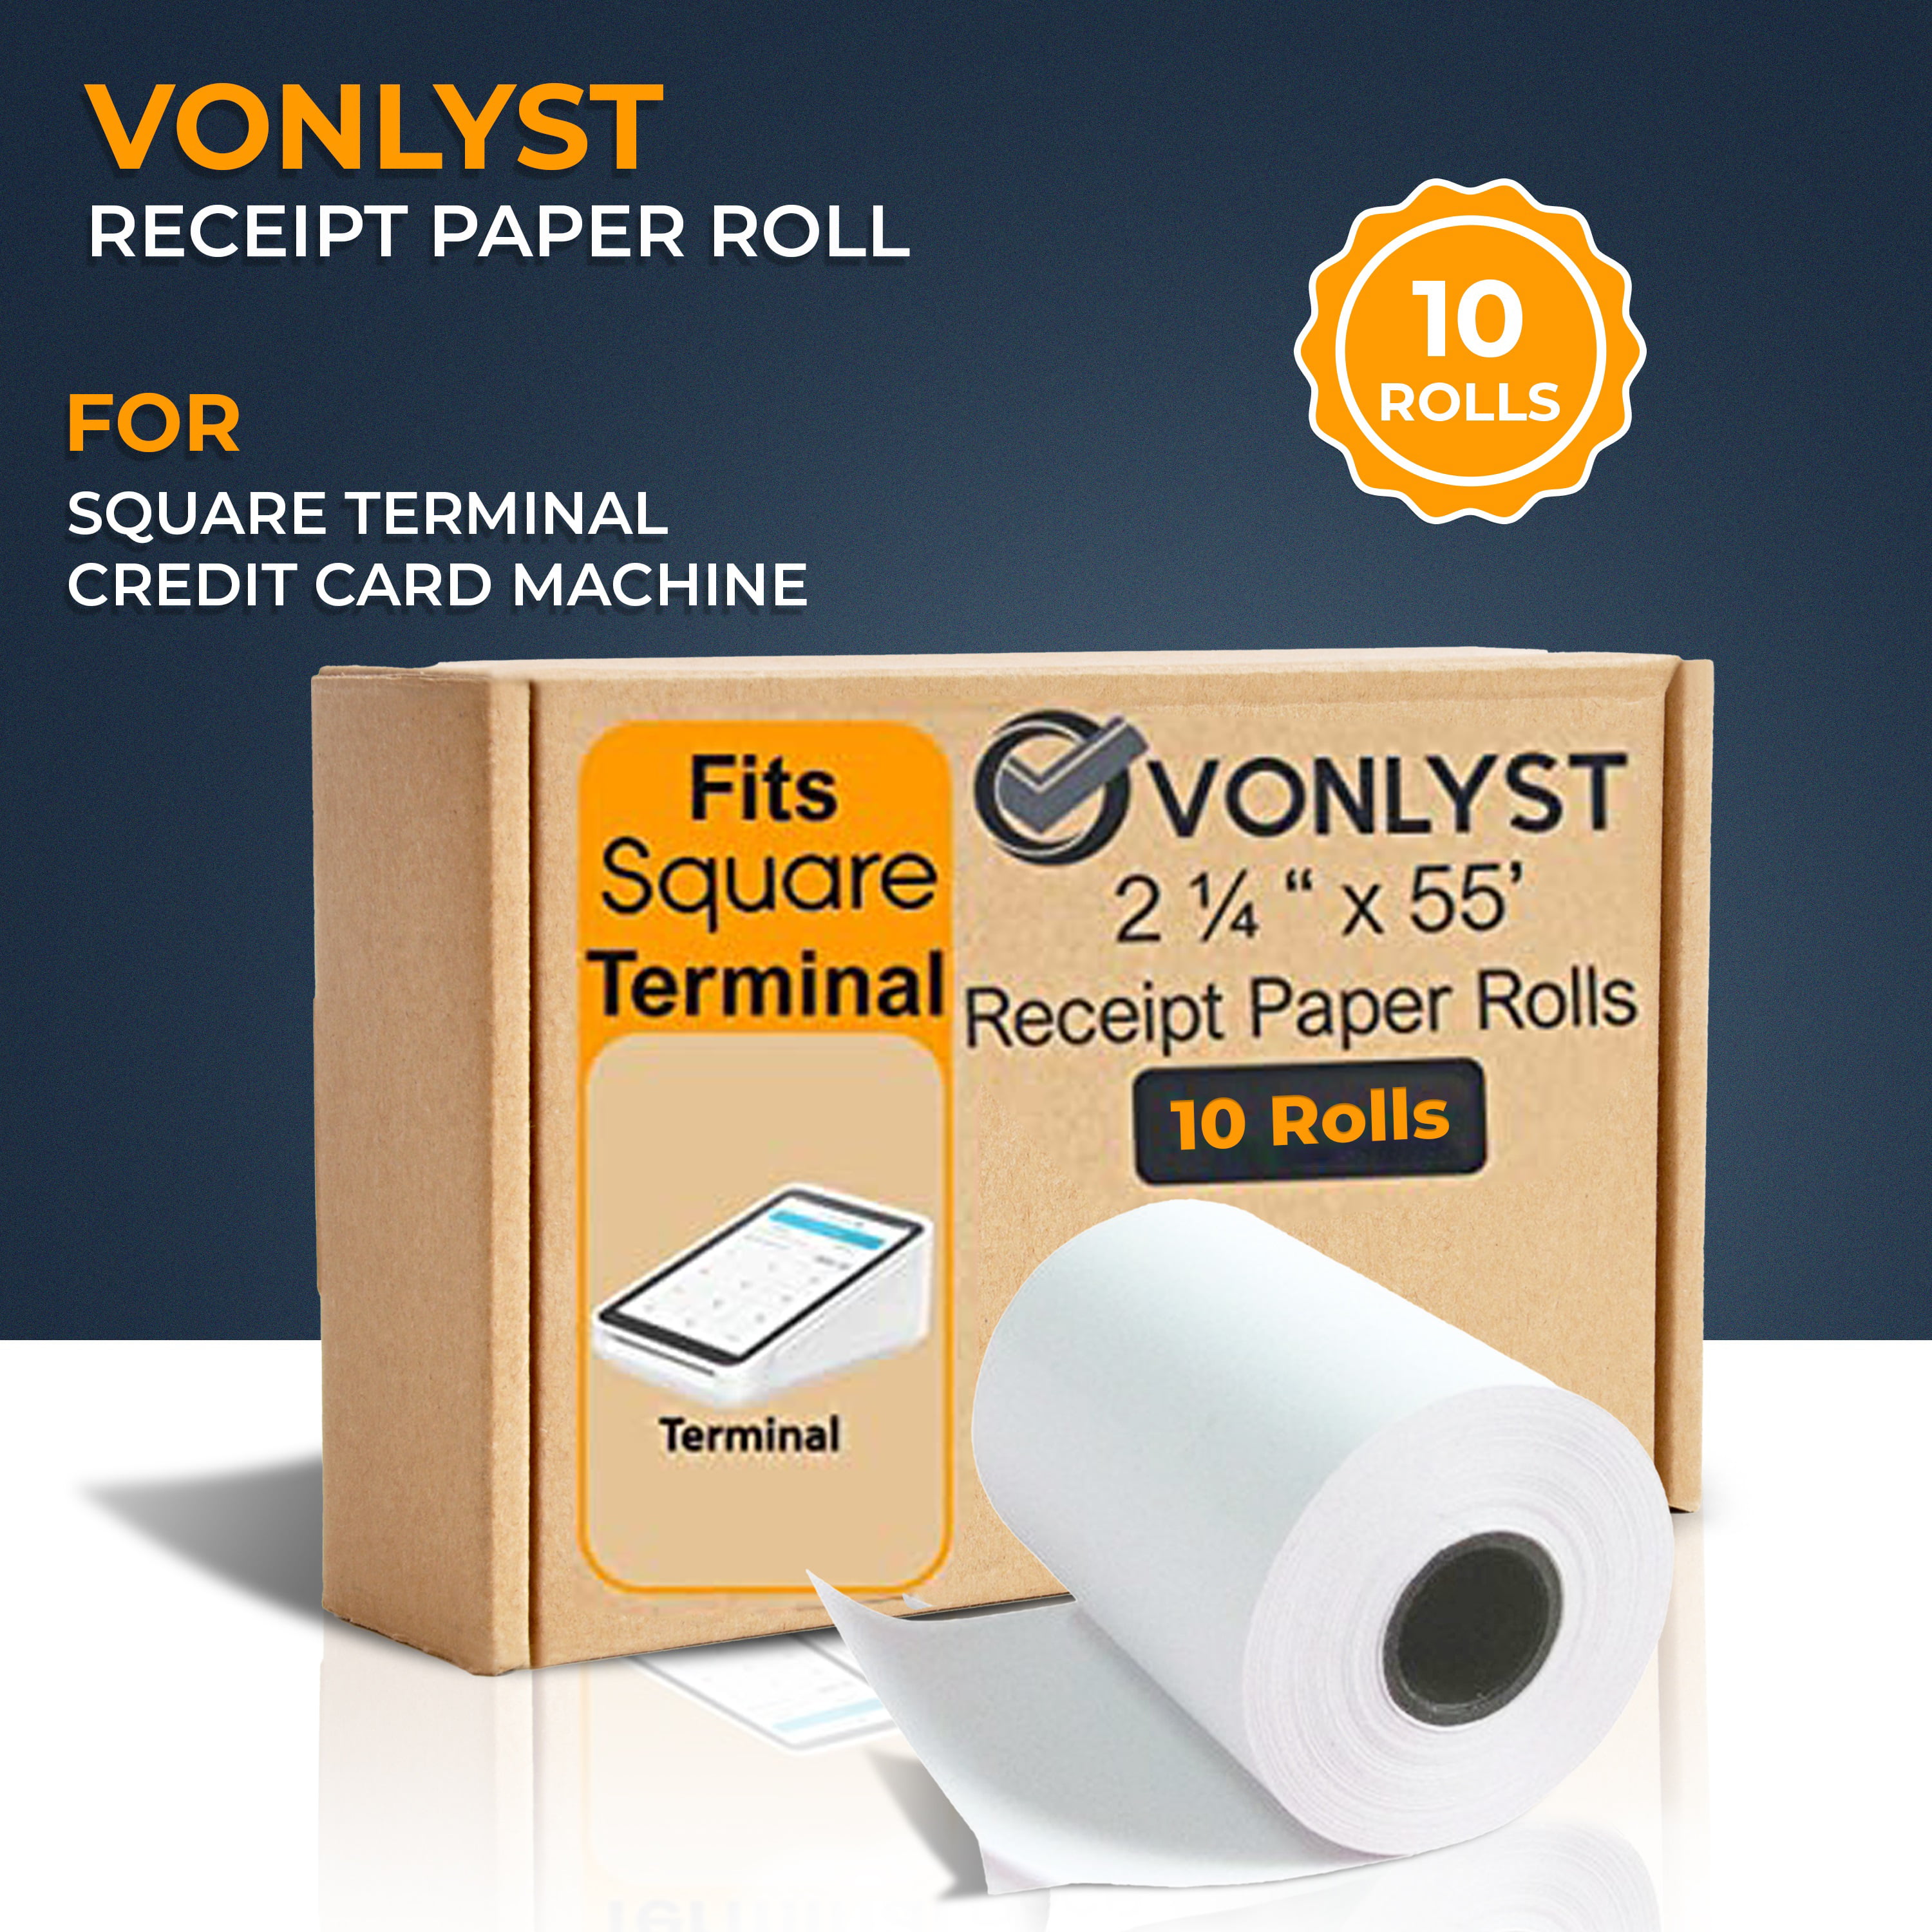 Roll Dimensions 57 x 40 mm 12 m 5* Pack of 10 Thermal Printer Rolls for Bank Card Payment Machines Length